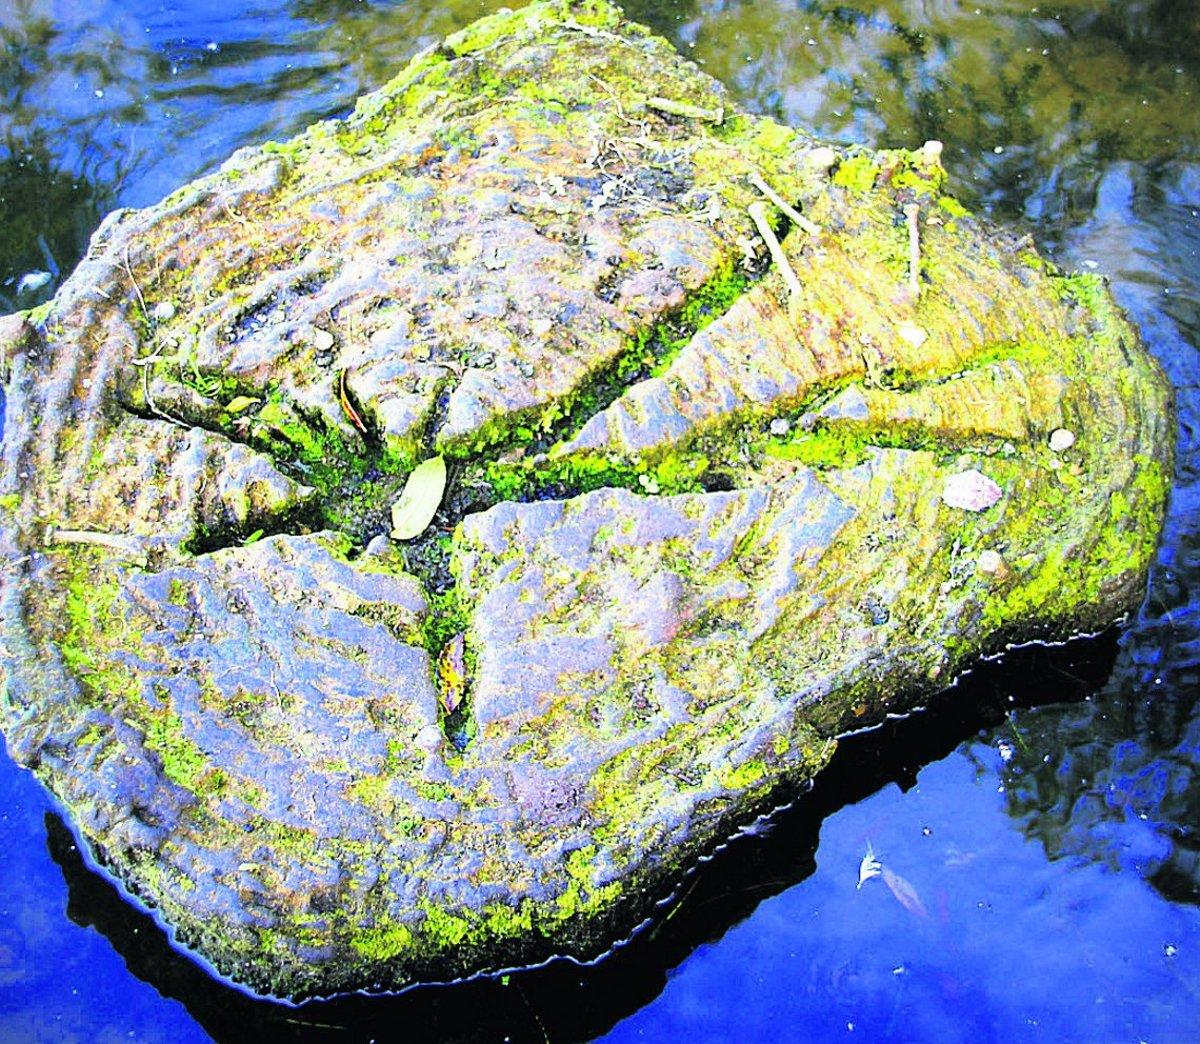 Swiindon Advertiser readers photographs
A petrified tree stump at the rear of Coate Water
Picture: KEVIN JOHN STARES